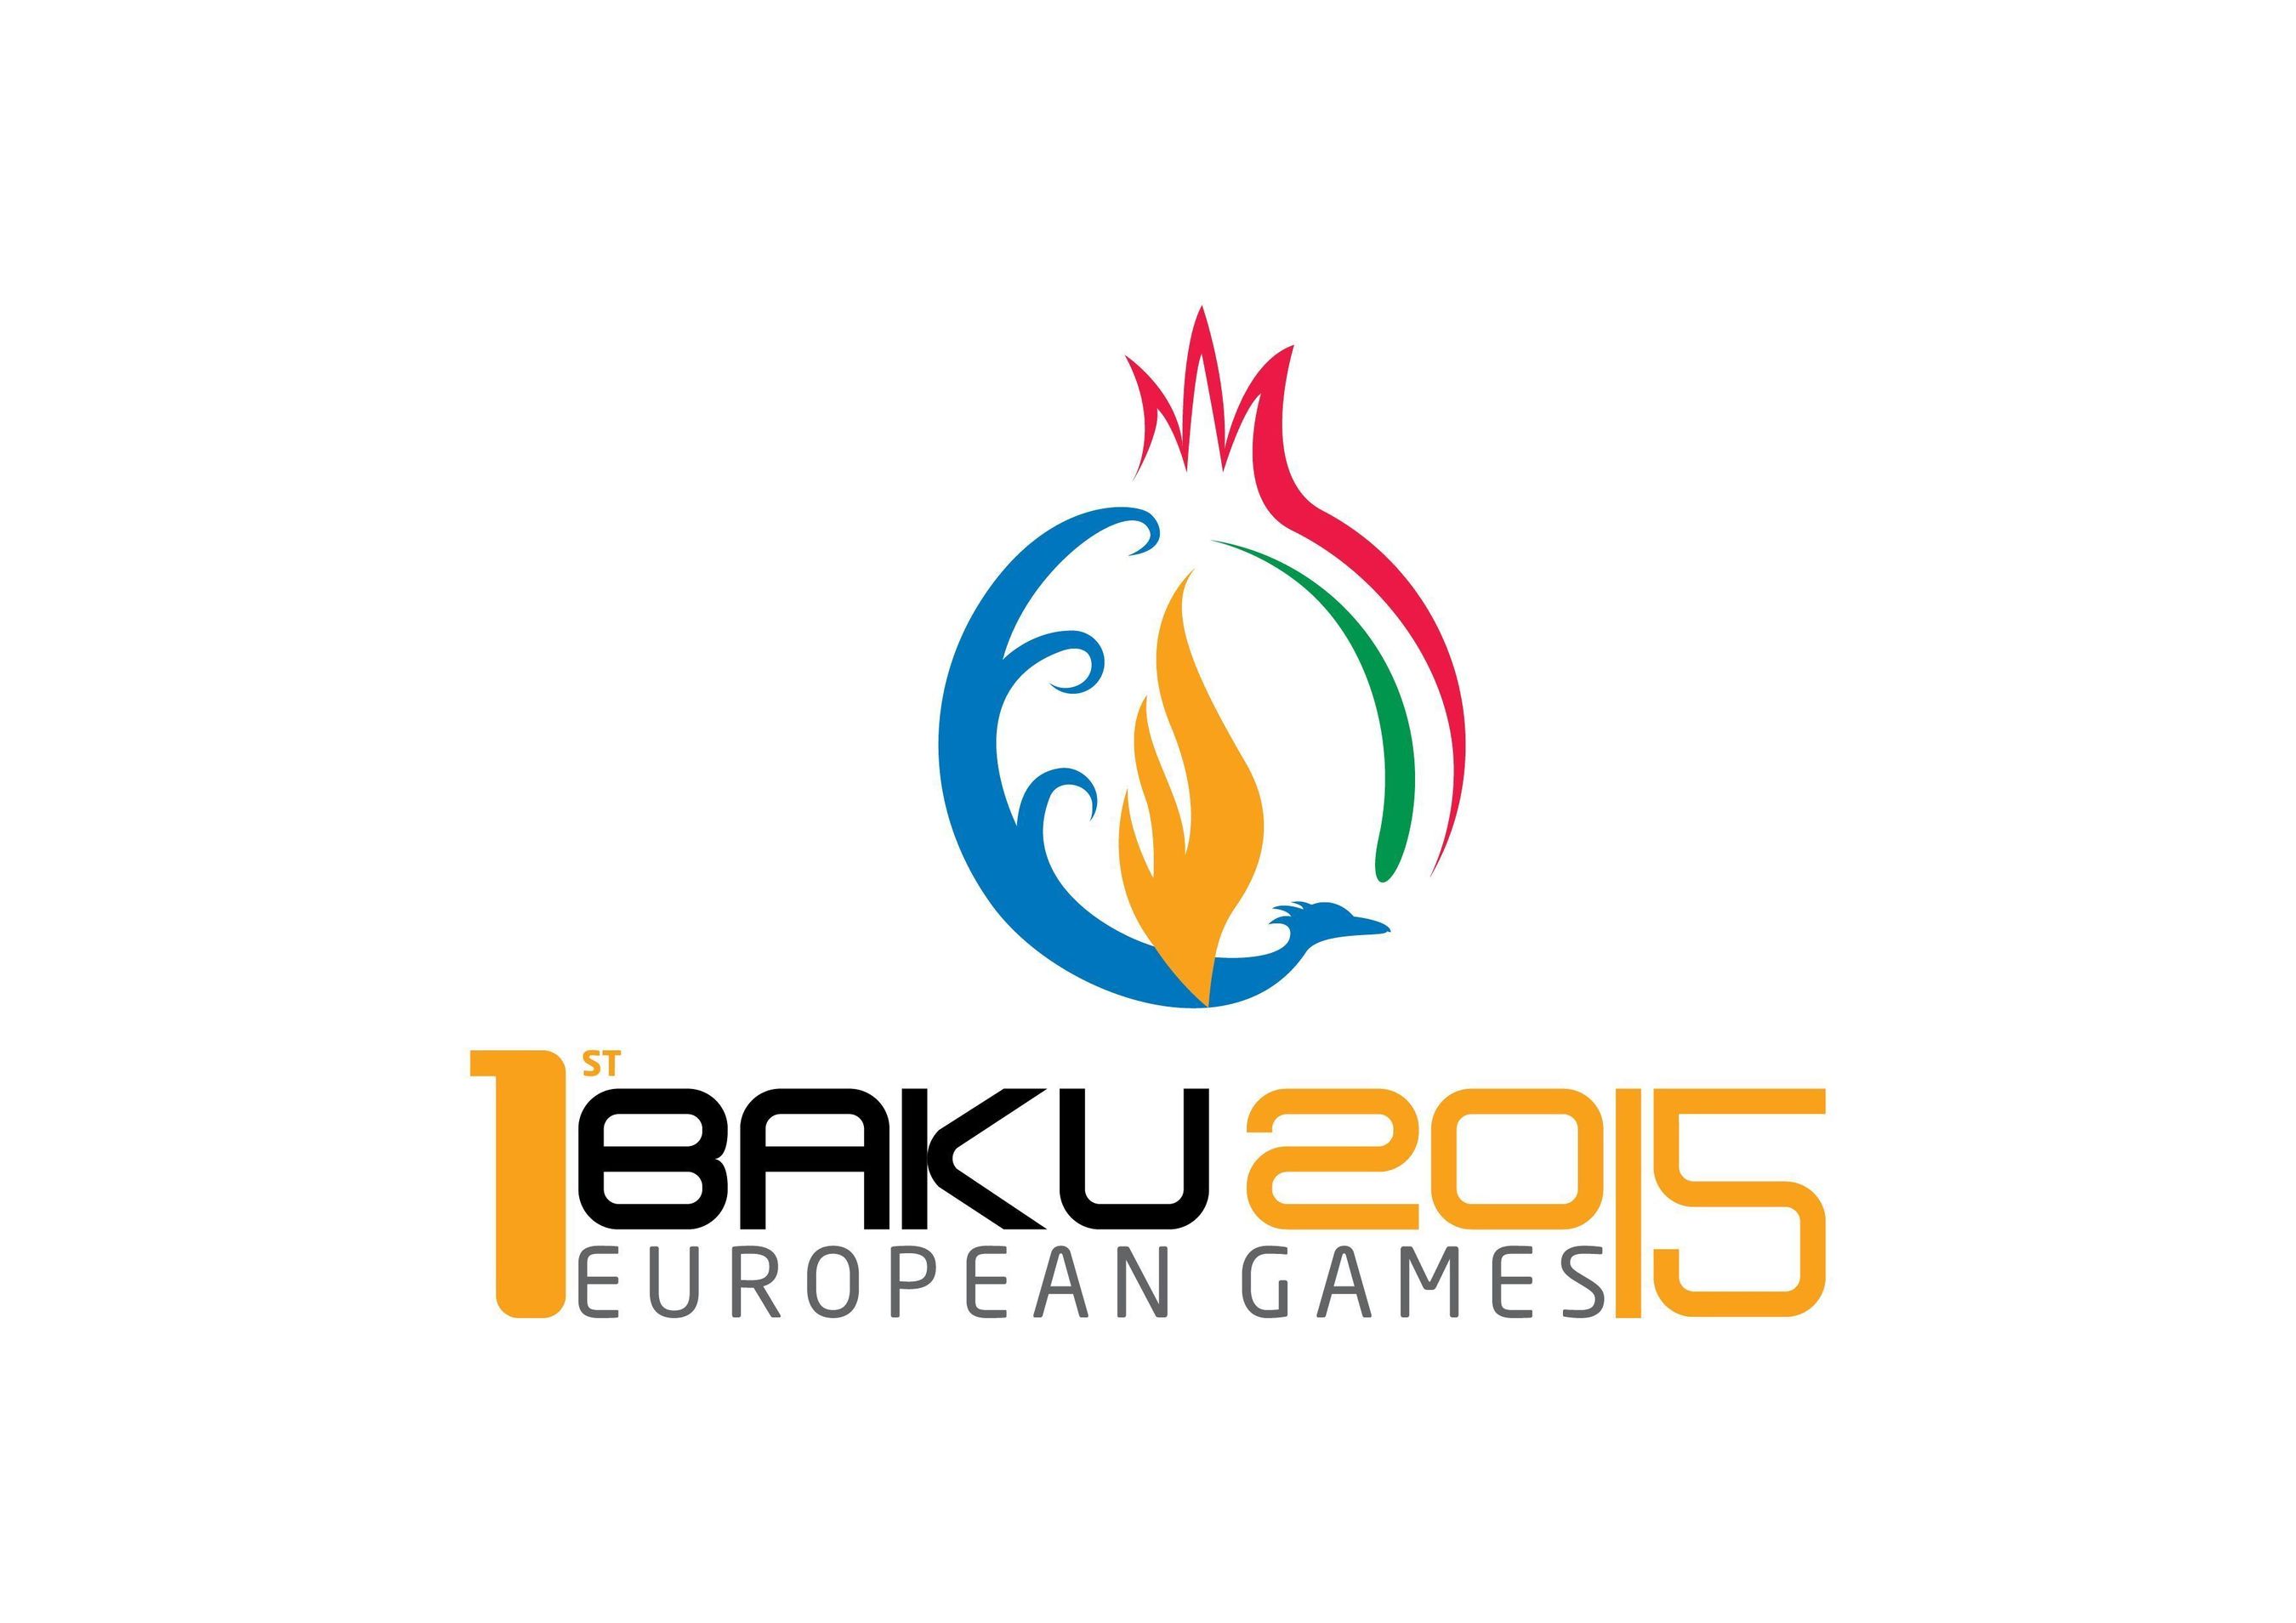 The Baku 2015 logo, unveiled today at the 42nd EOC General Assembly in Rome (PRNewsFoto/Baku 2015 European Games)